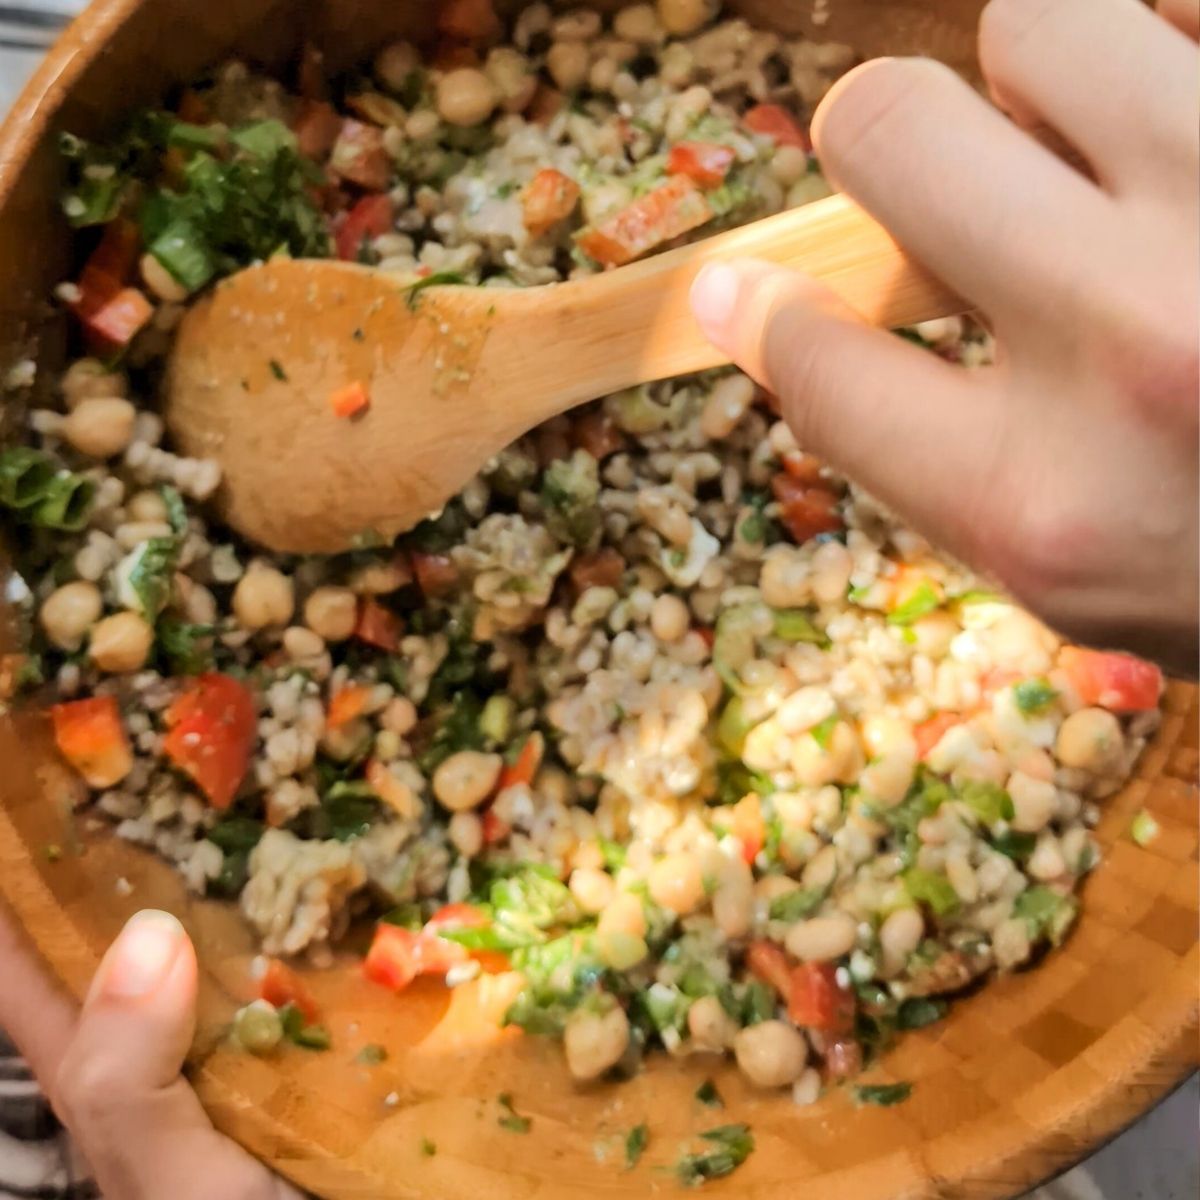 a hand and a wooden spoon mixing the bean and barley salad with the pesto basil dressing.